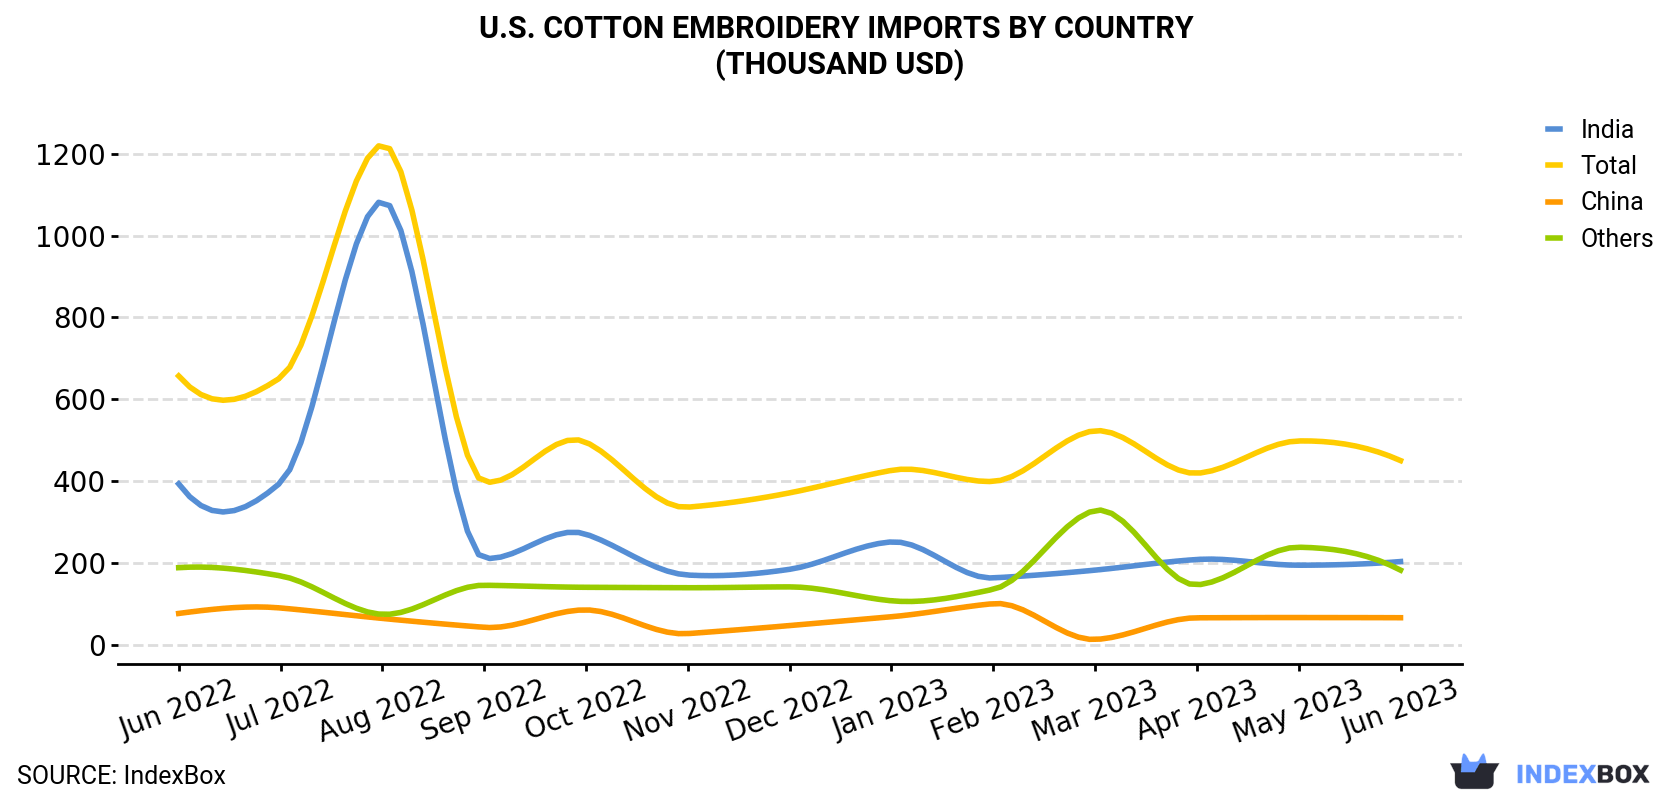 U.S. Cotton Embroidery Imports By Country (Thousand USD)